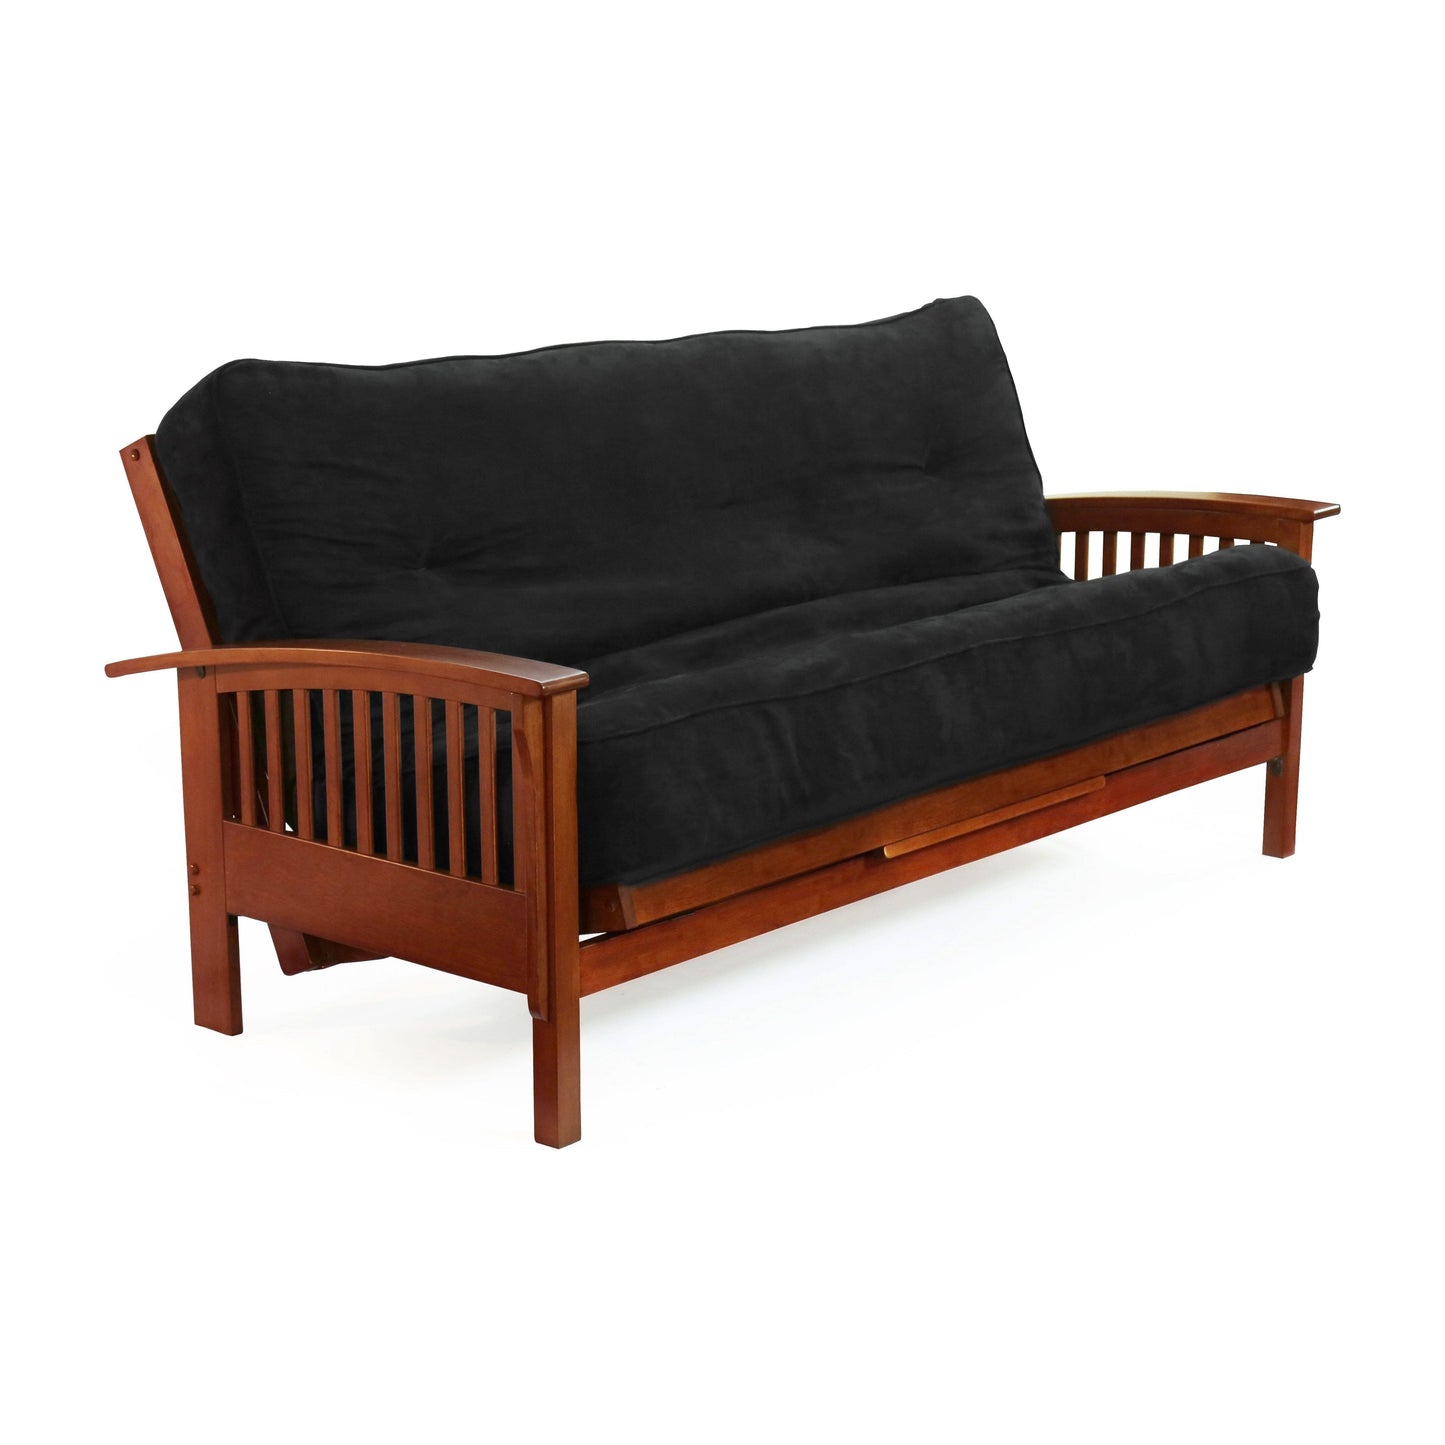 Night and Day Winchester Queen Futon Frame in black walnut finish BA-WNC-BMG-QEN-BWT